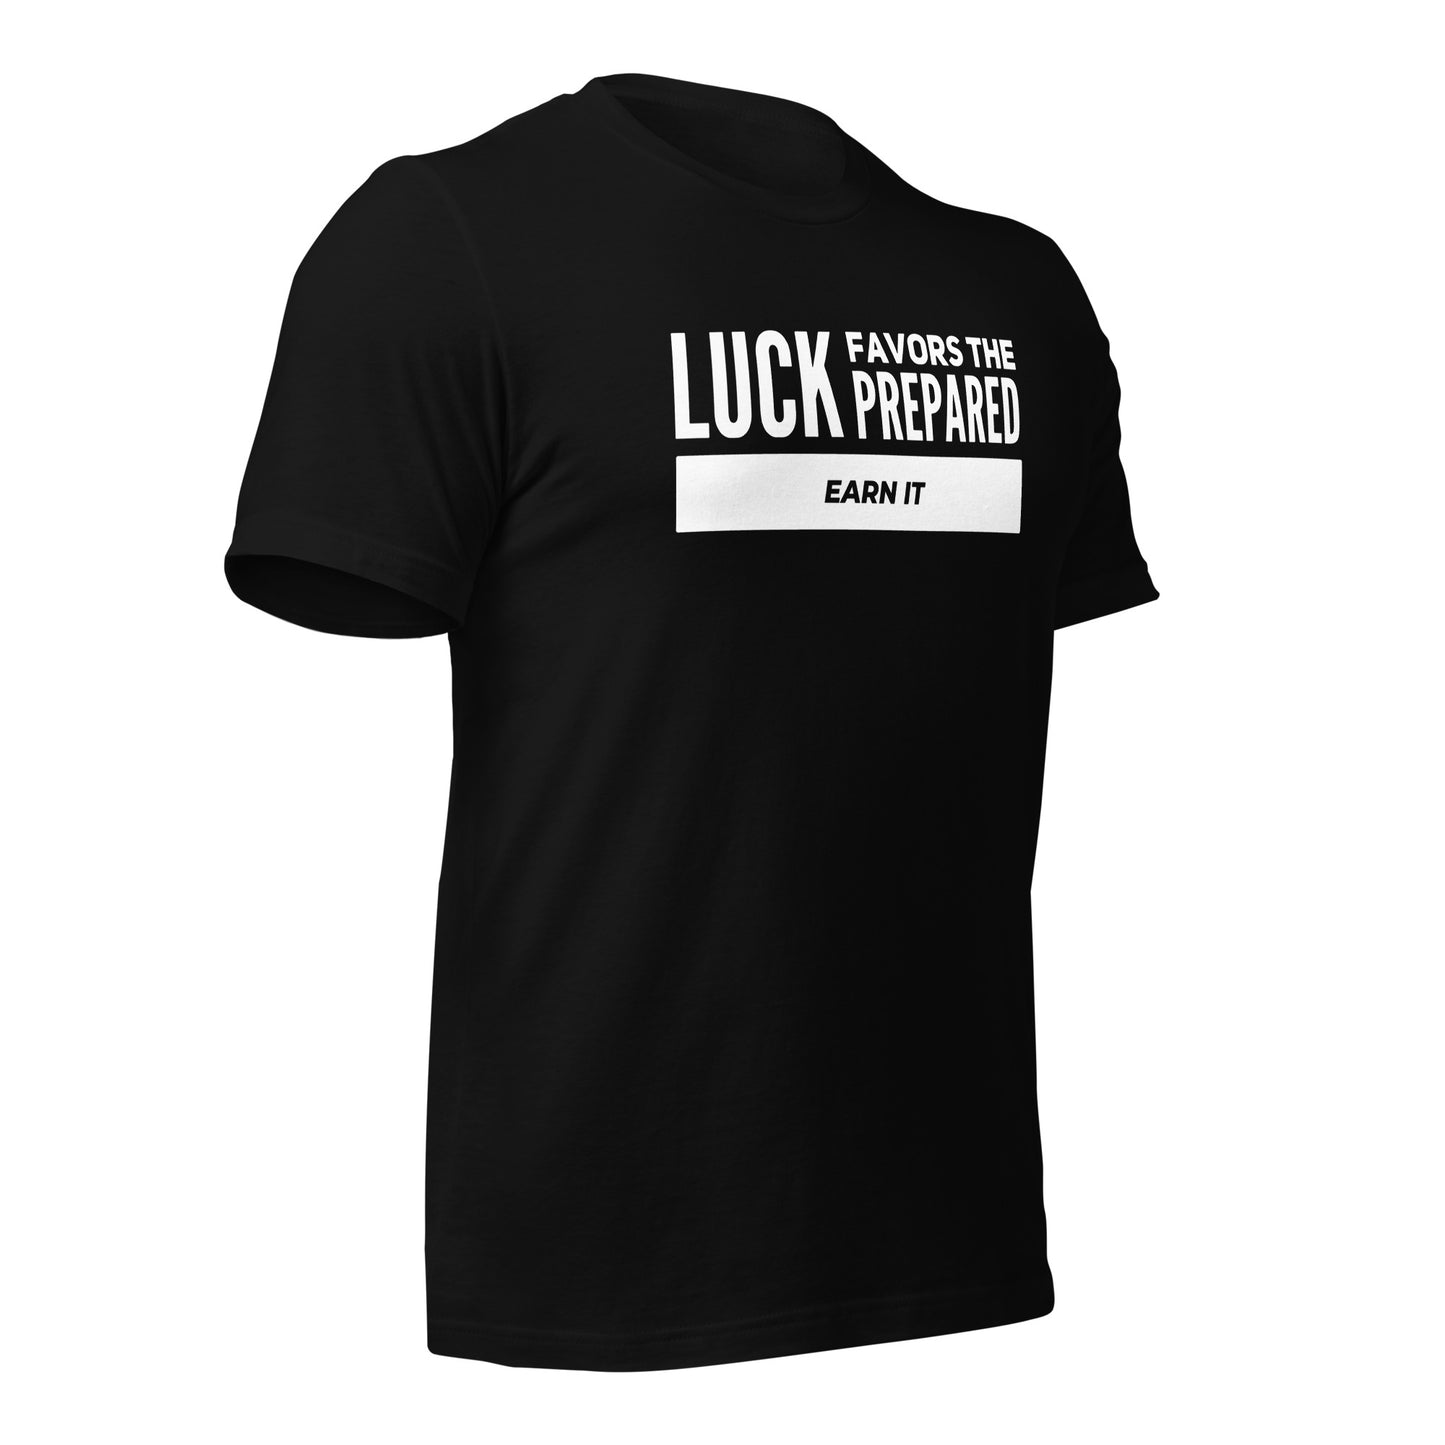 Luck Favors The Prepared | Earn It Fitted t-shirt